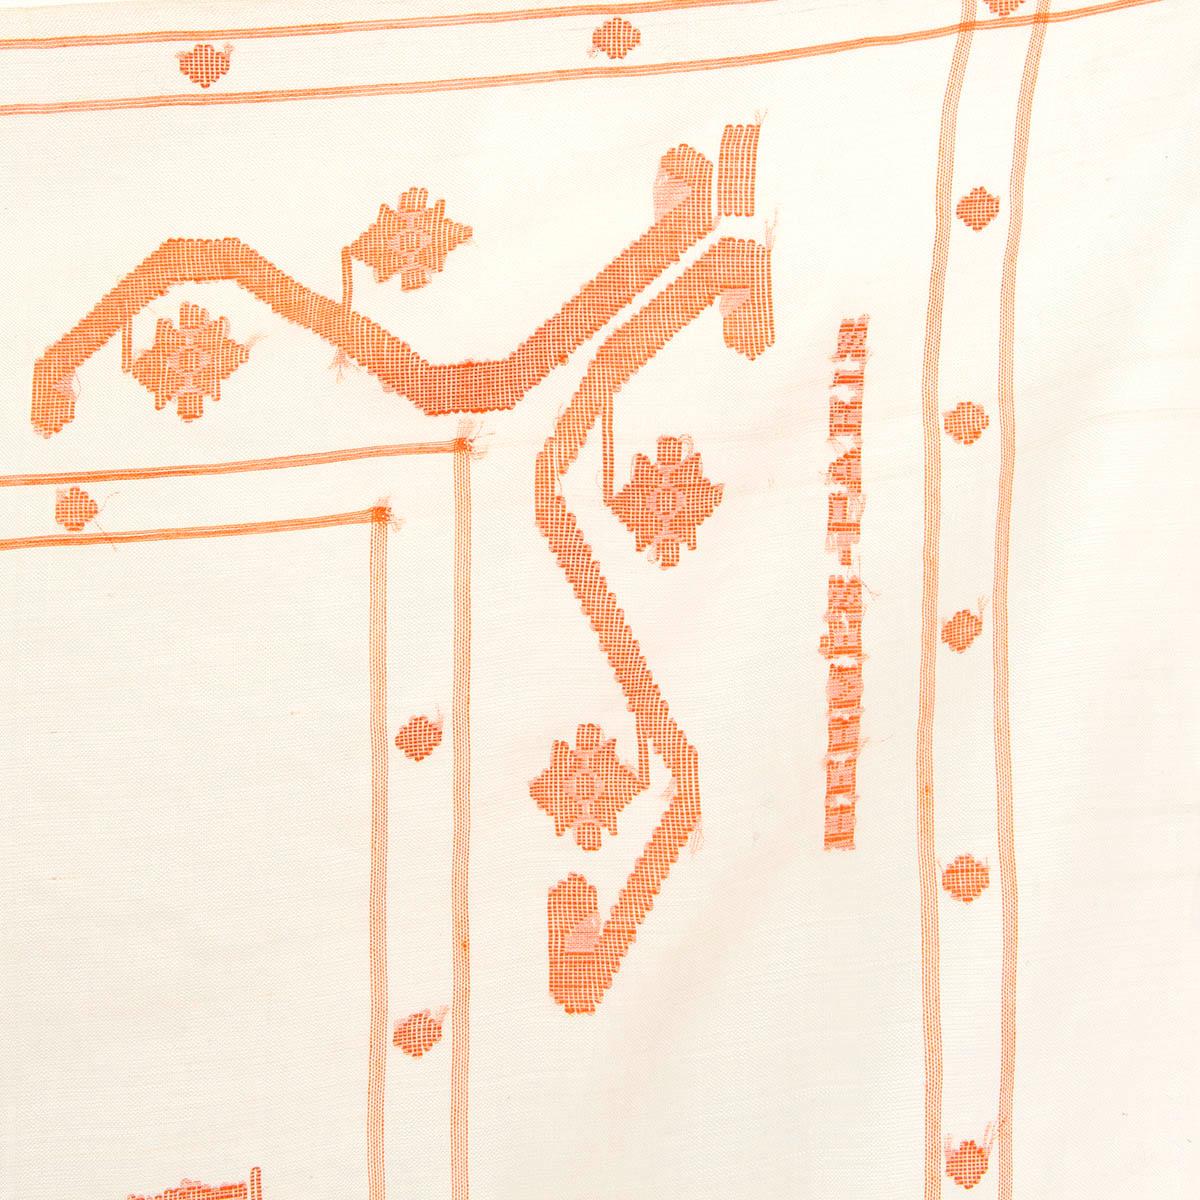 100% authentic Hermès fringed scarf in ivory and orange cotton voile (50%), silk (40%) and viscose (10%) with detail in orange. Handwoven in India. Has been worn and is in excellent condition. 

Measurements
Width	90cm (35.1in)
Length	200cm